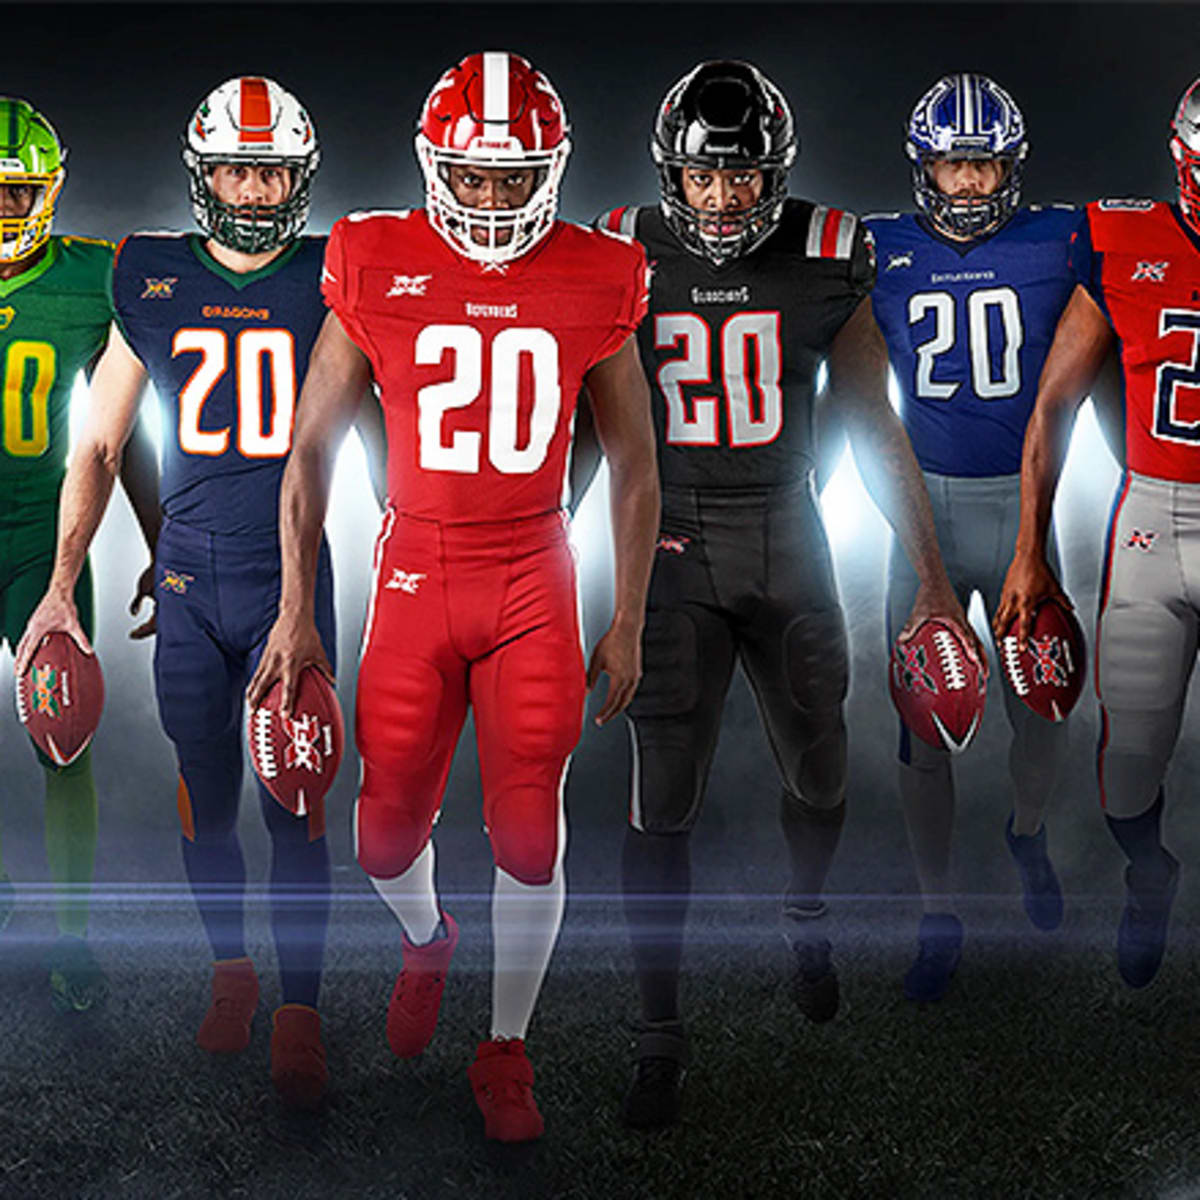 Ranking the 2020 New NFL Uniforms From Best to Worst